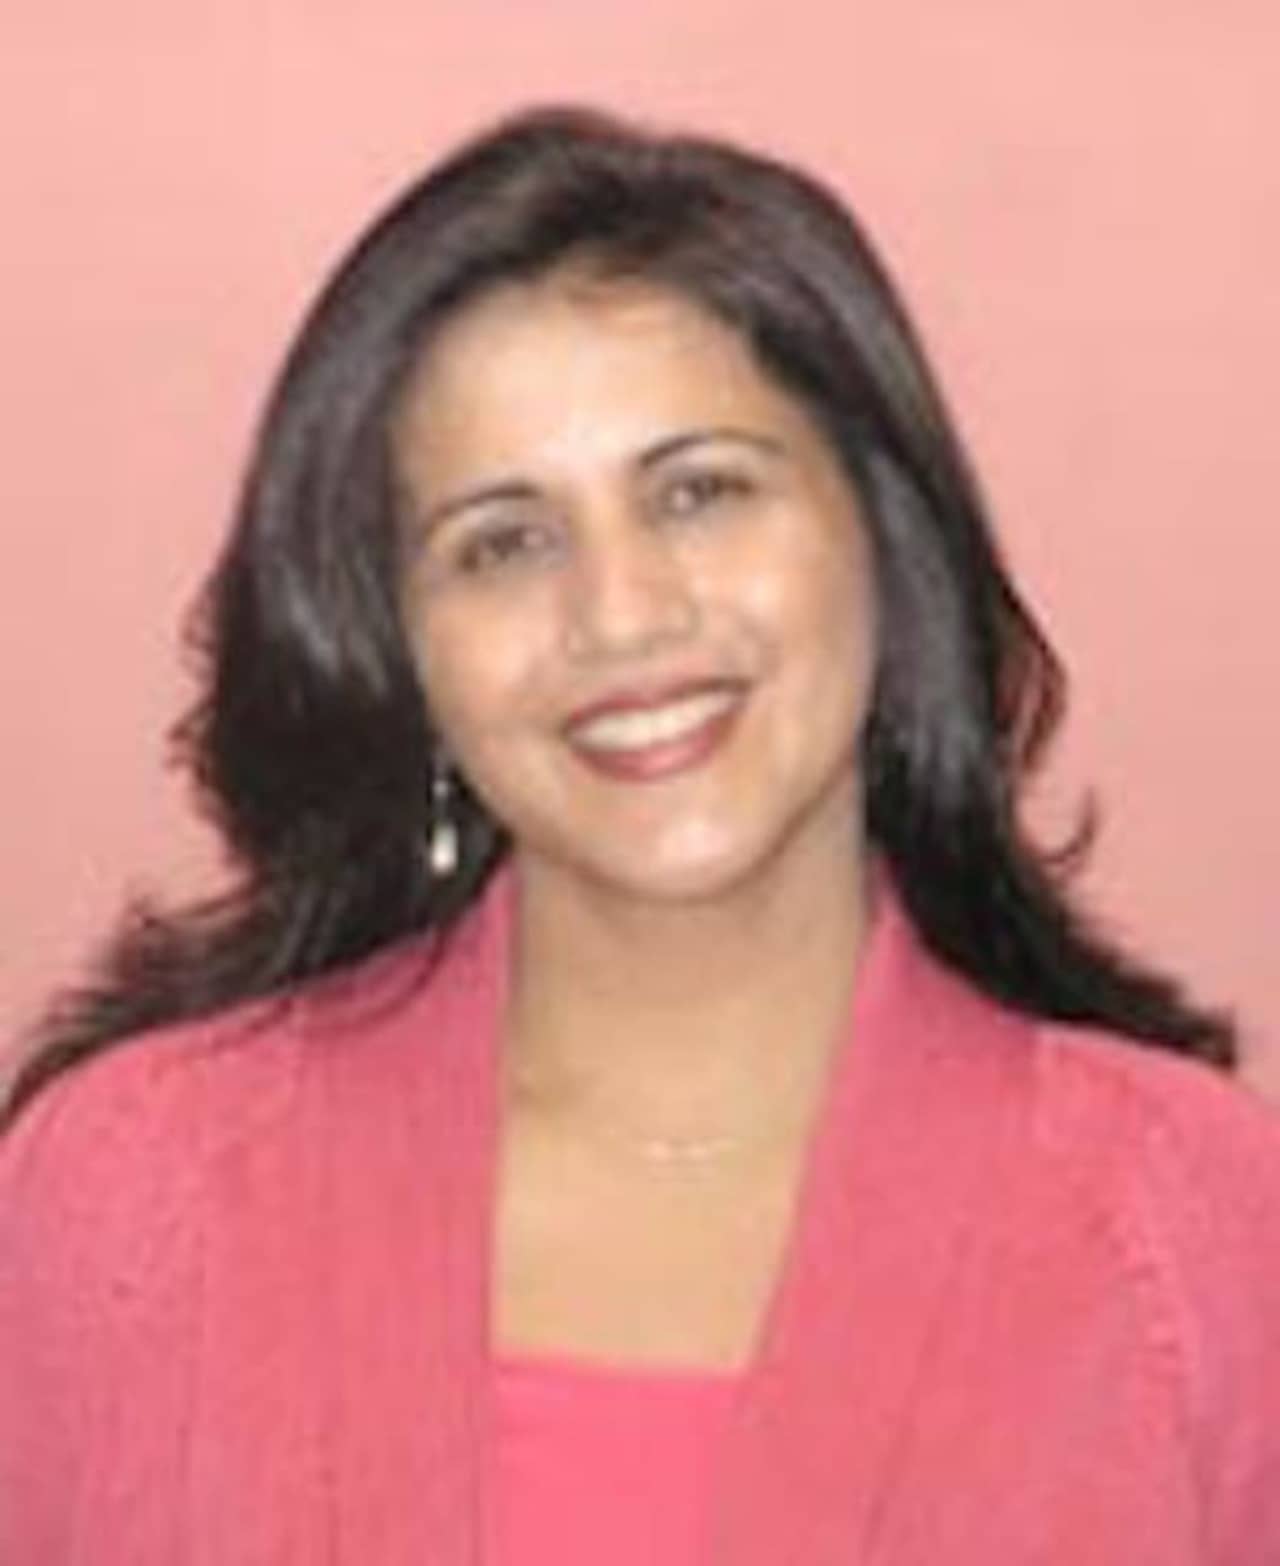 Dr. Ronika Choudhary safely delivered a baby girl in a car on the side of Route 25 in Trumbull on Thursday.